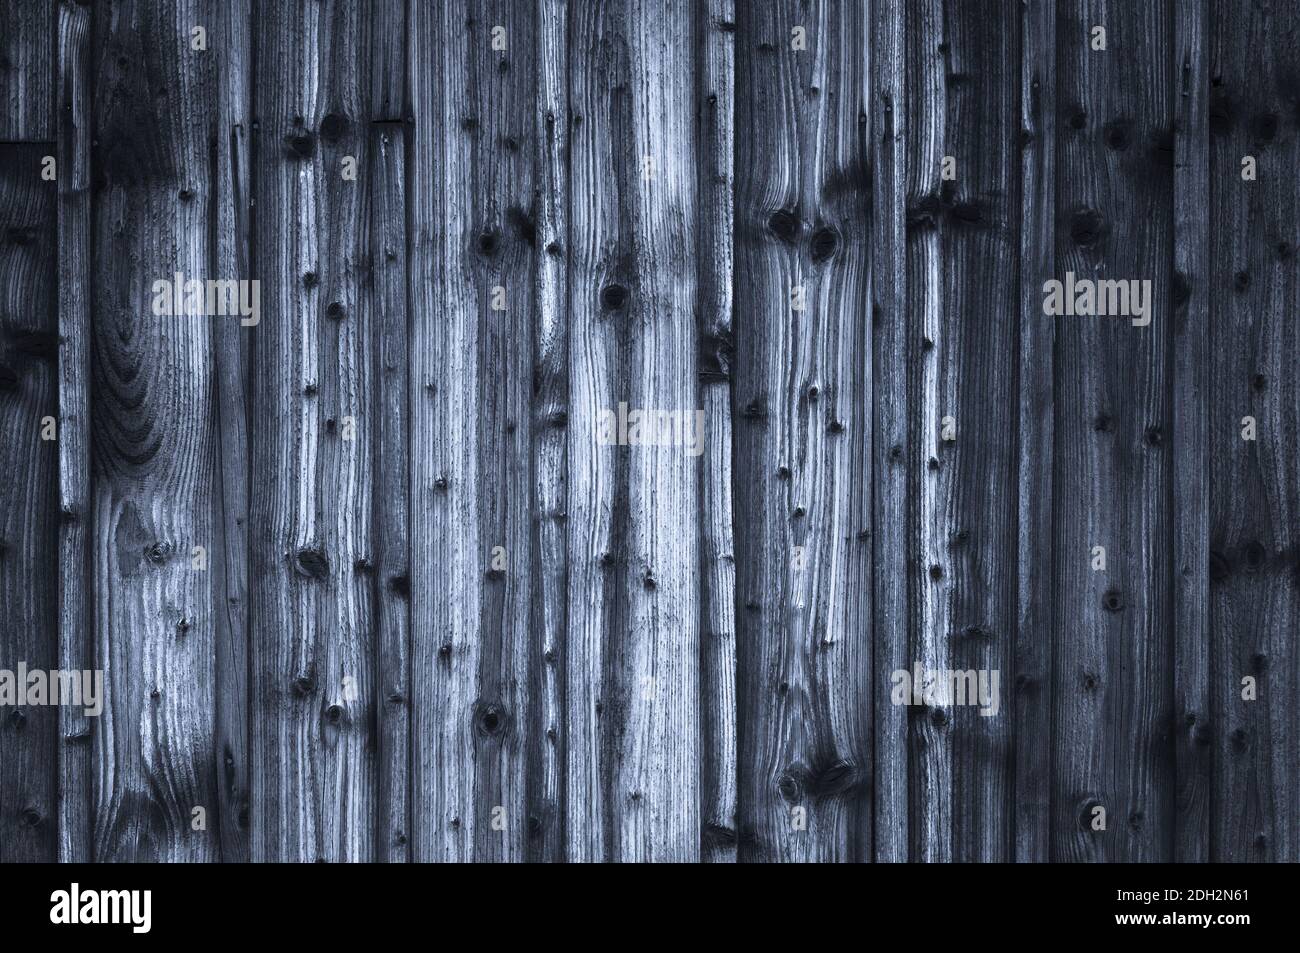 Dark blue rustic wood background with textured effect. Stock Photo